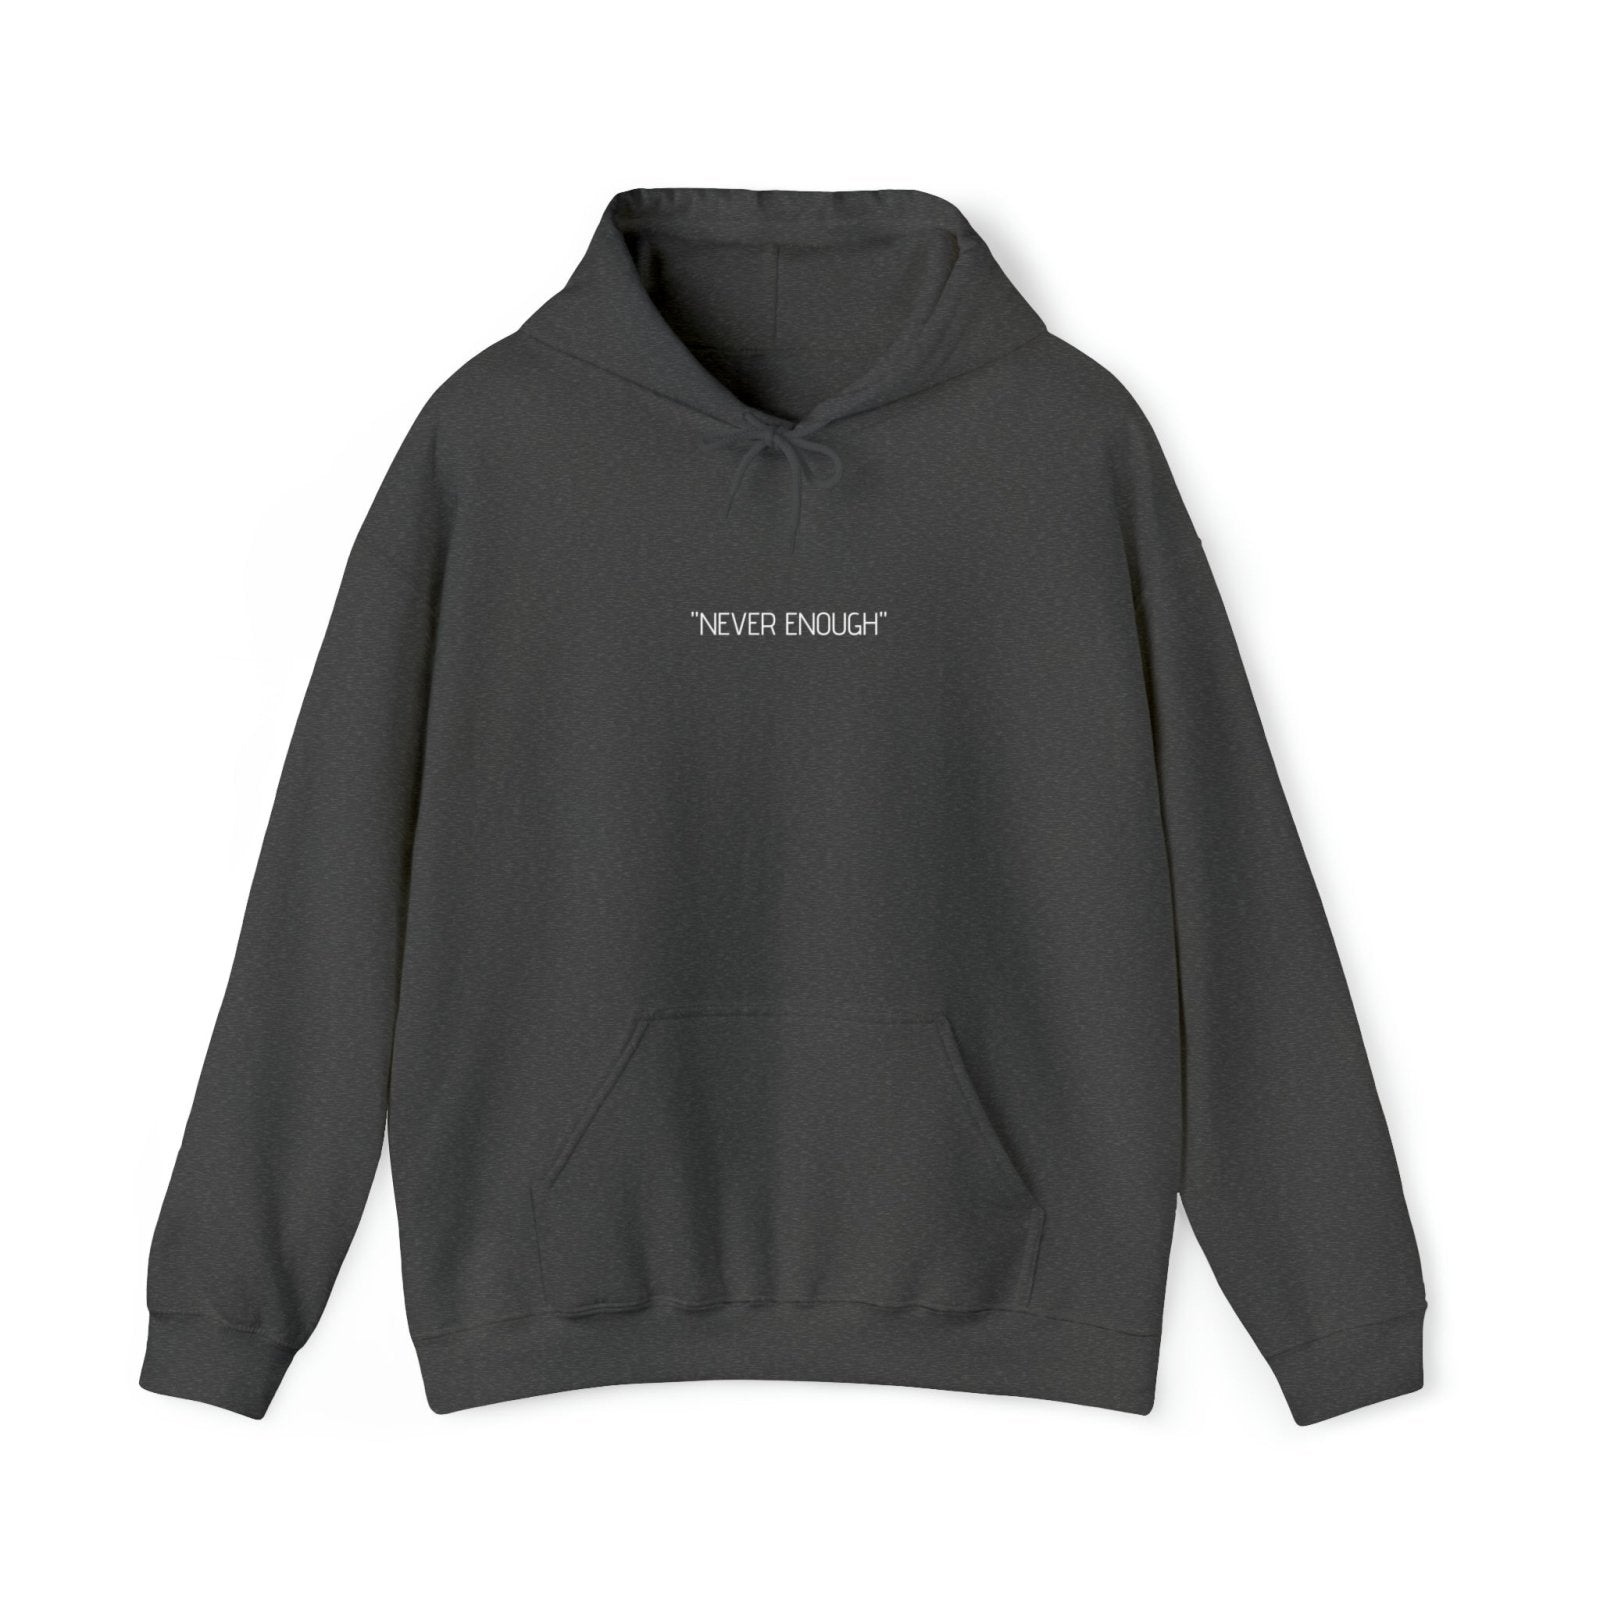 "NEVER ENOUGH" motivational hoodie - Dowding